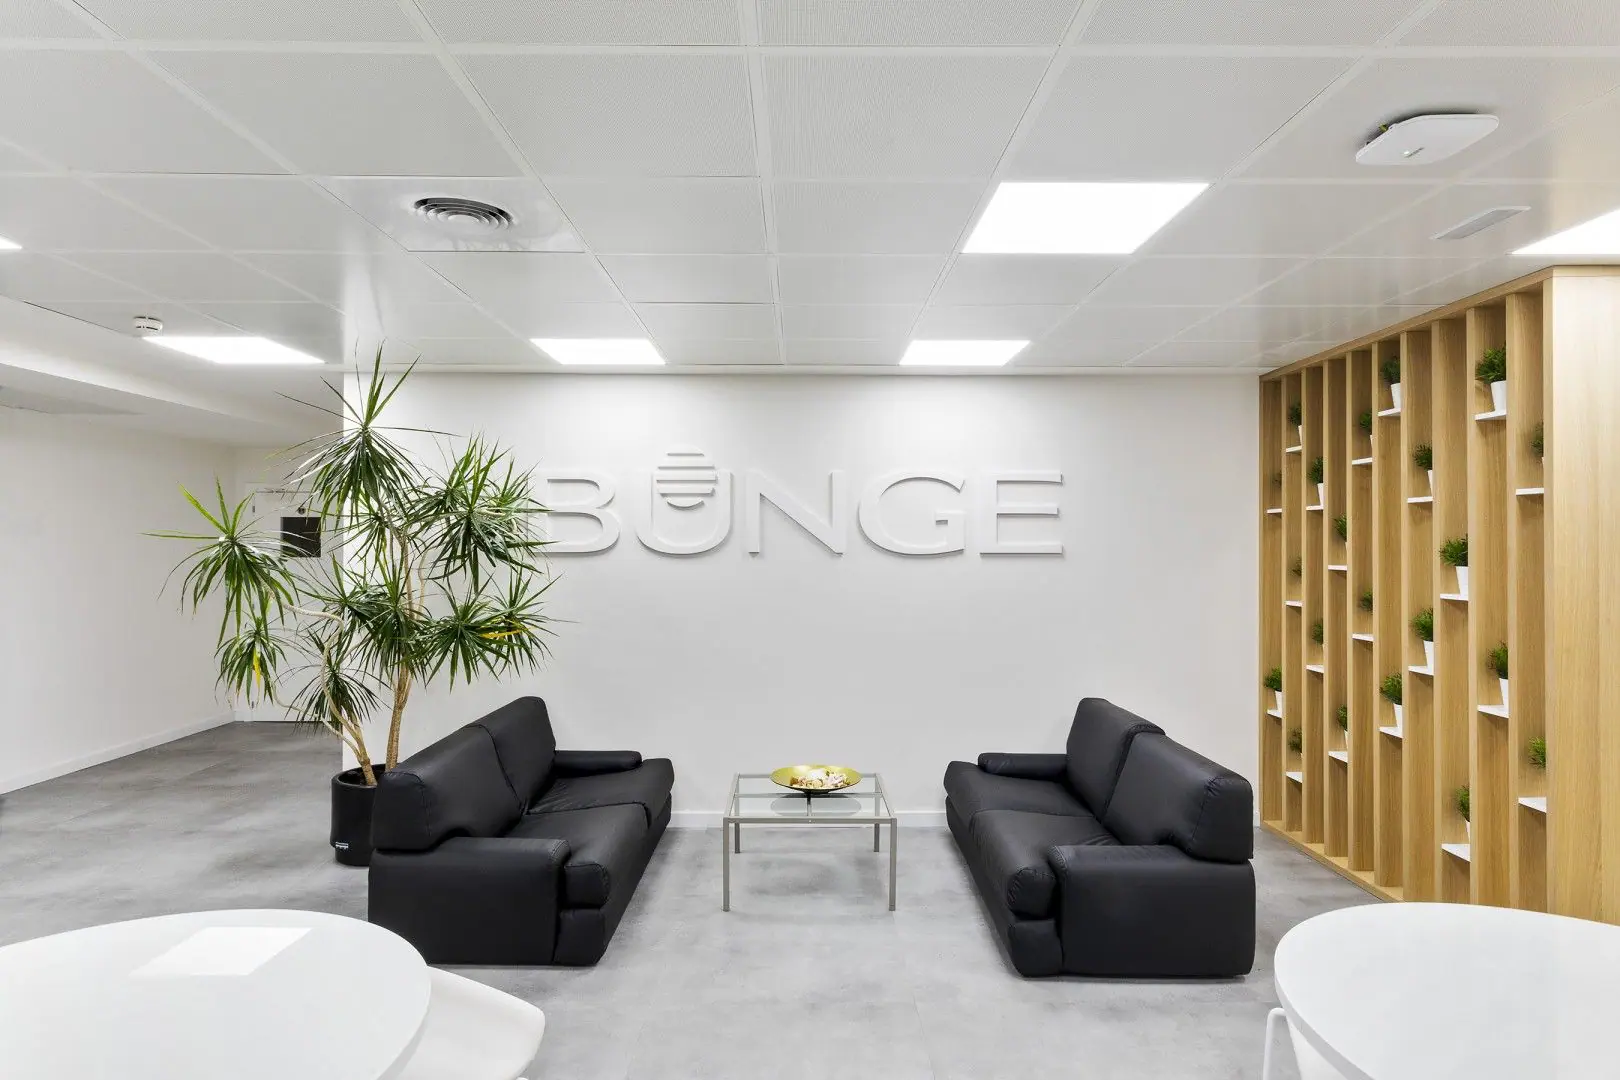 55212-55200-bunge-offices